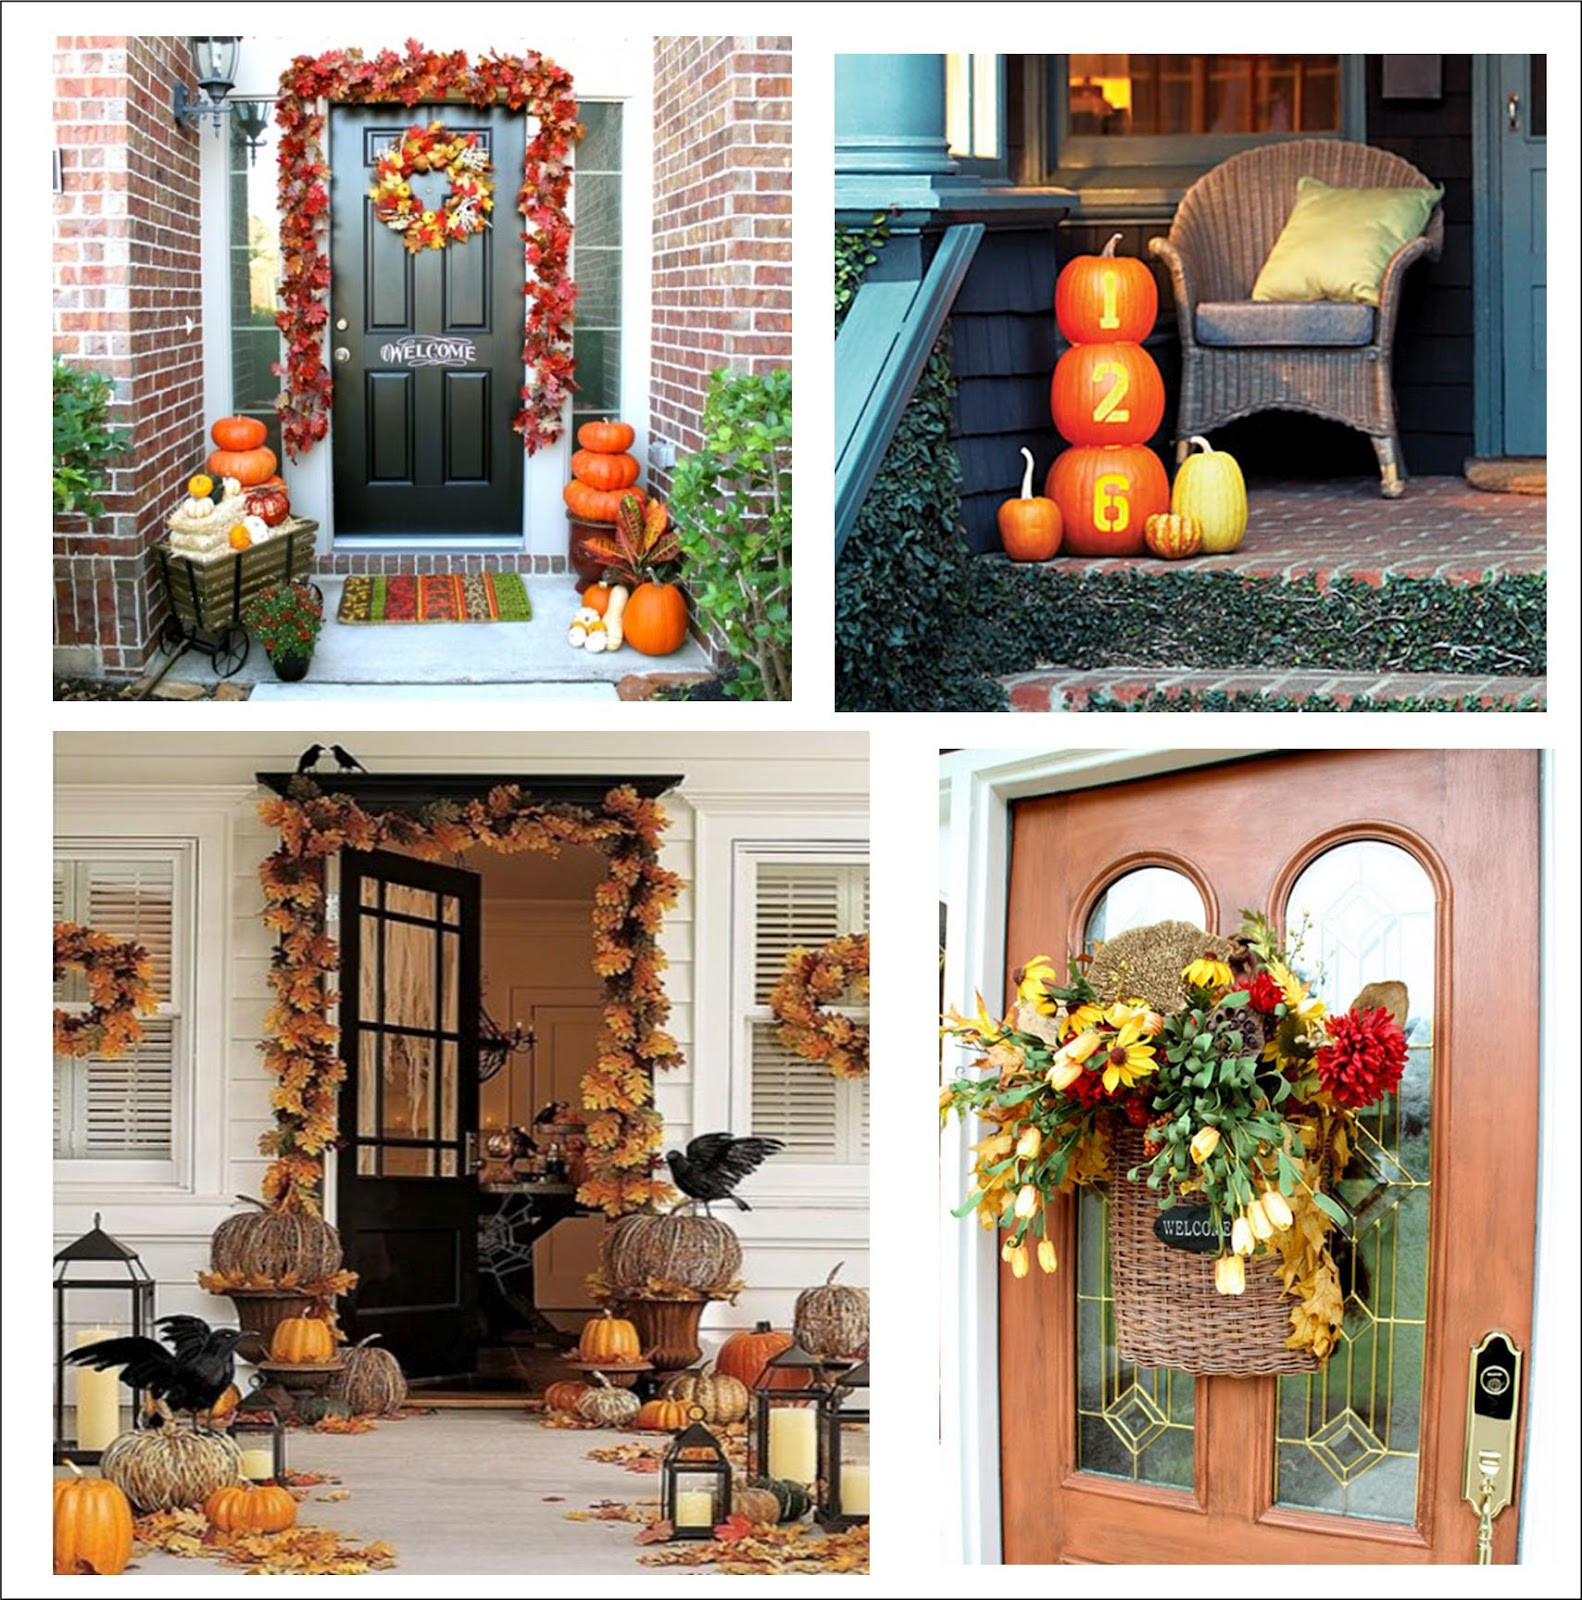 Fall Decorations For Porch
 It s Written on the Wall 90 Fall Porch Decorating Ideas